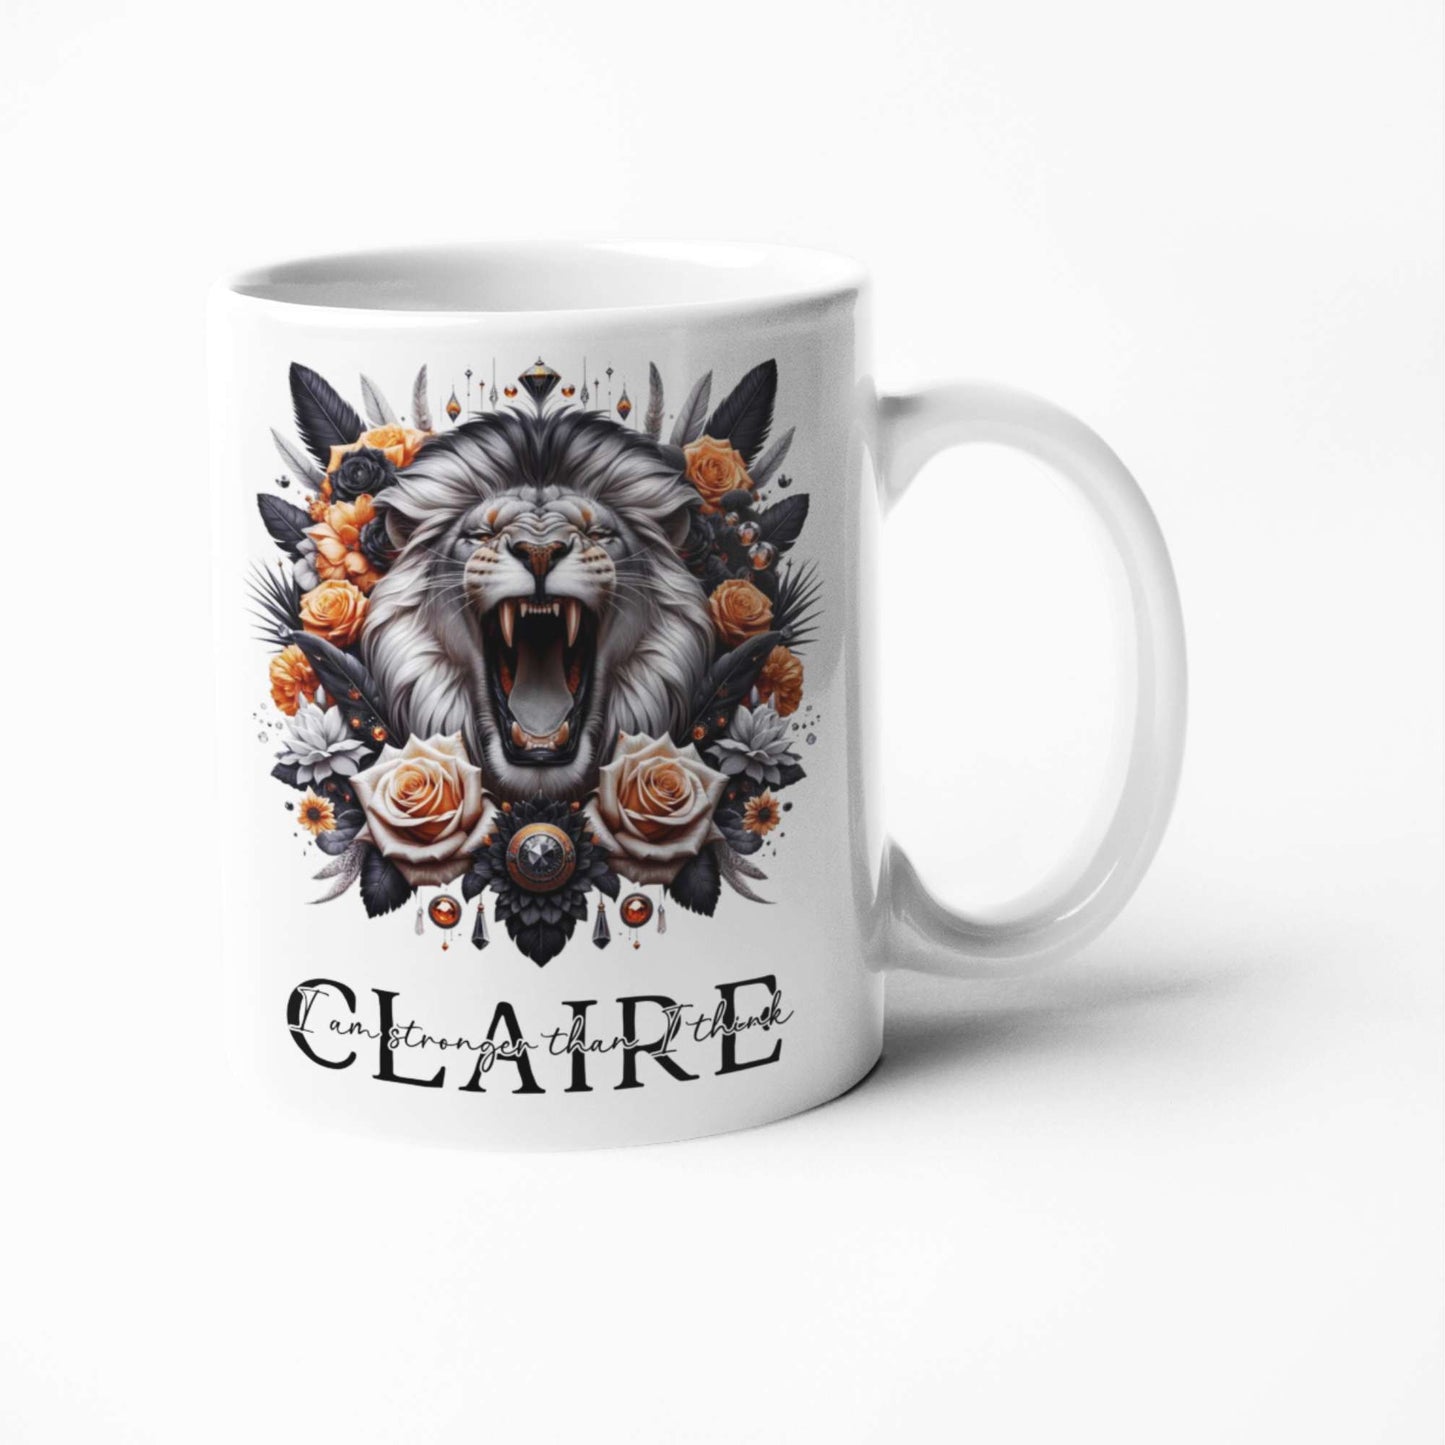 Personalised Roaring Lion Mugs & Tumblers: 11oz Black Inner, 15oz White, 20oz Insulated - Majestic Lion Drinkware for Coffee & Tea Lovers, Unique Gifts for All Occasions